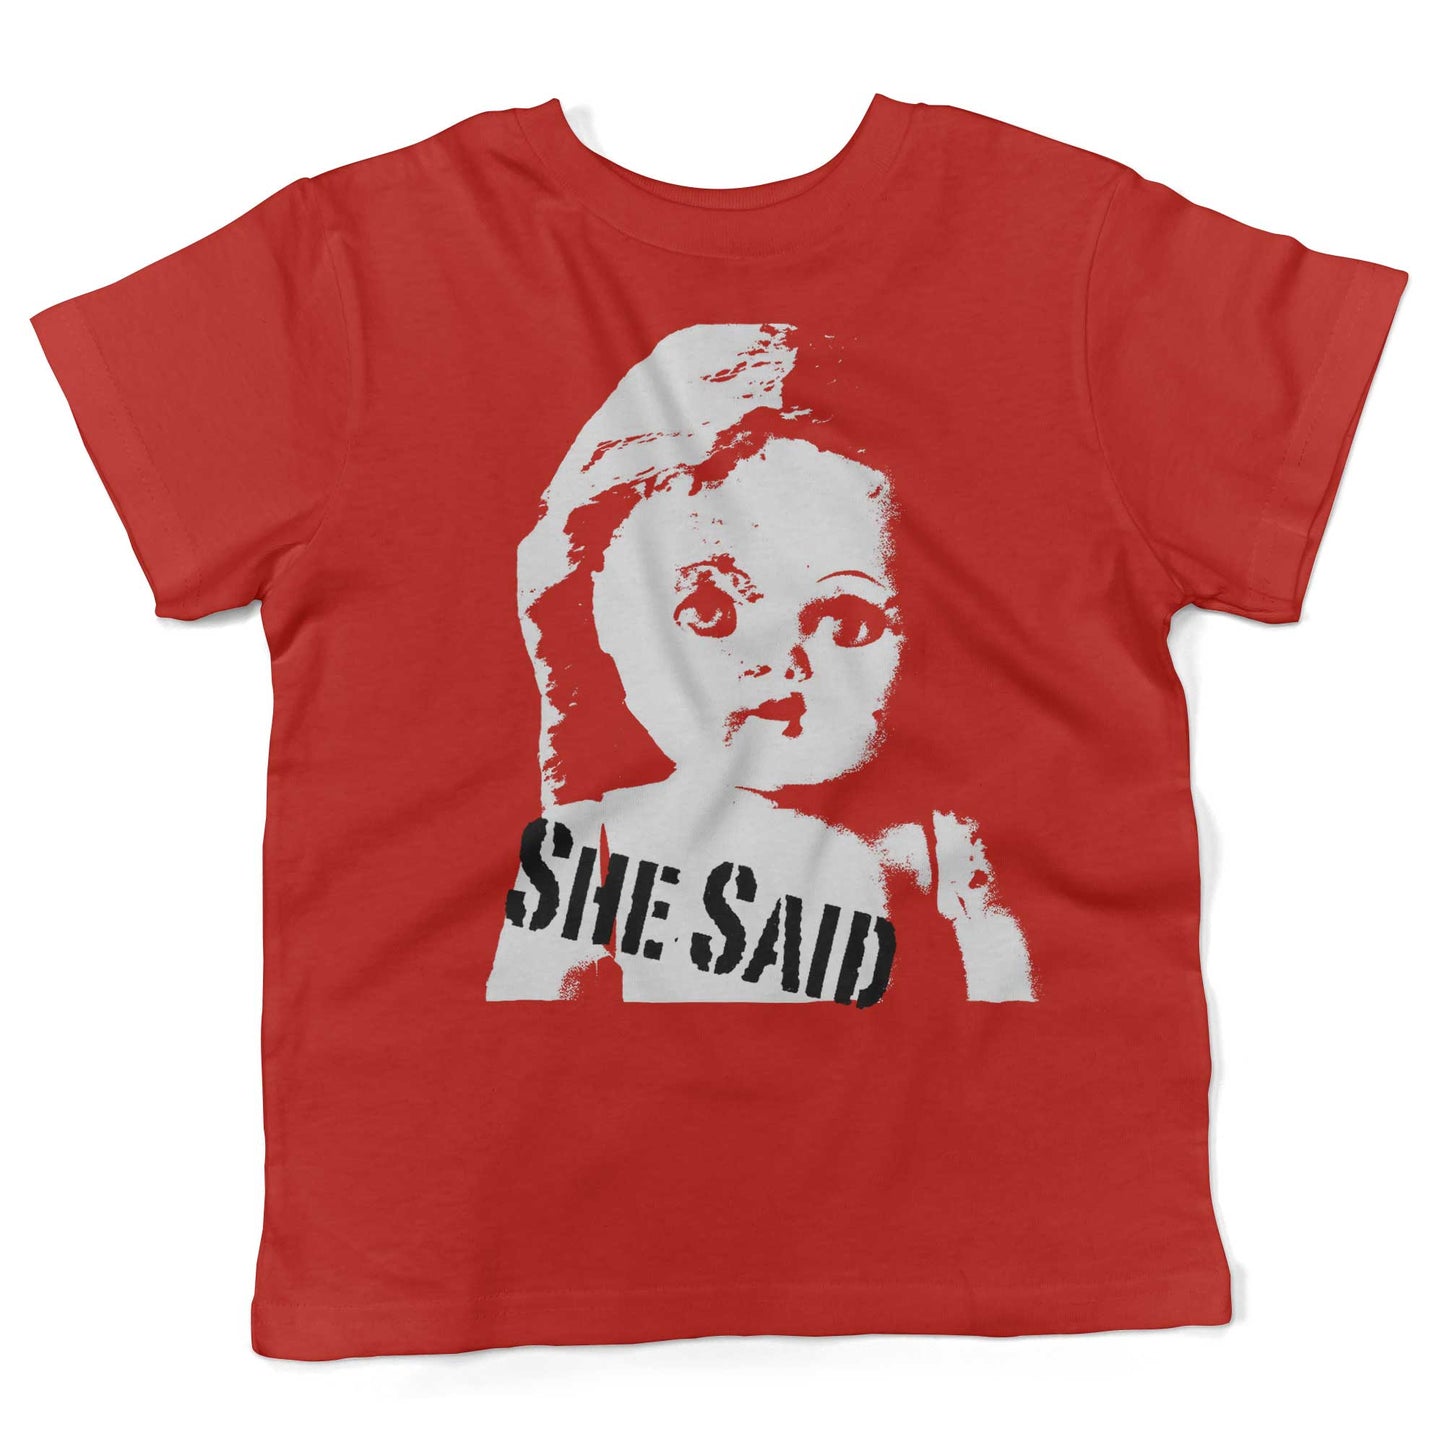 She Said Vintage Doll Head Toddler Shirt-Red-2T